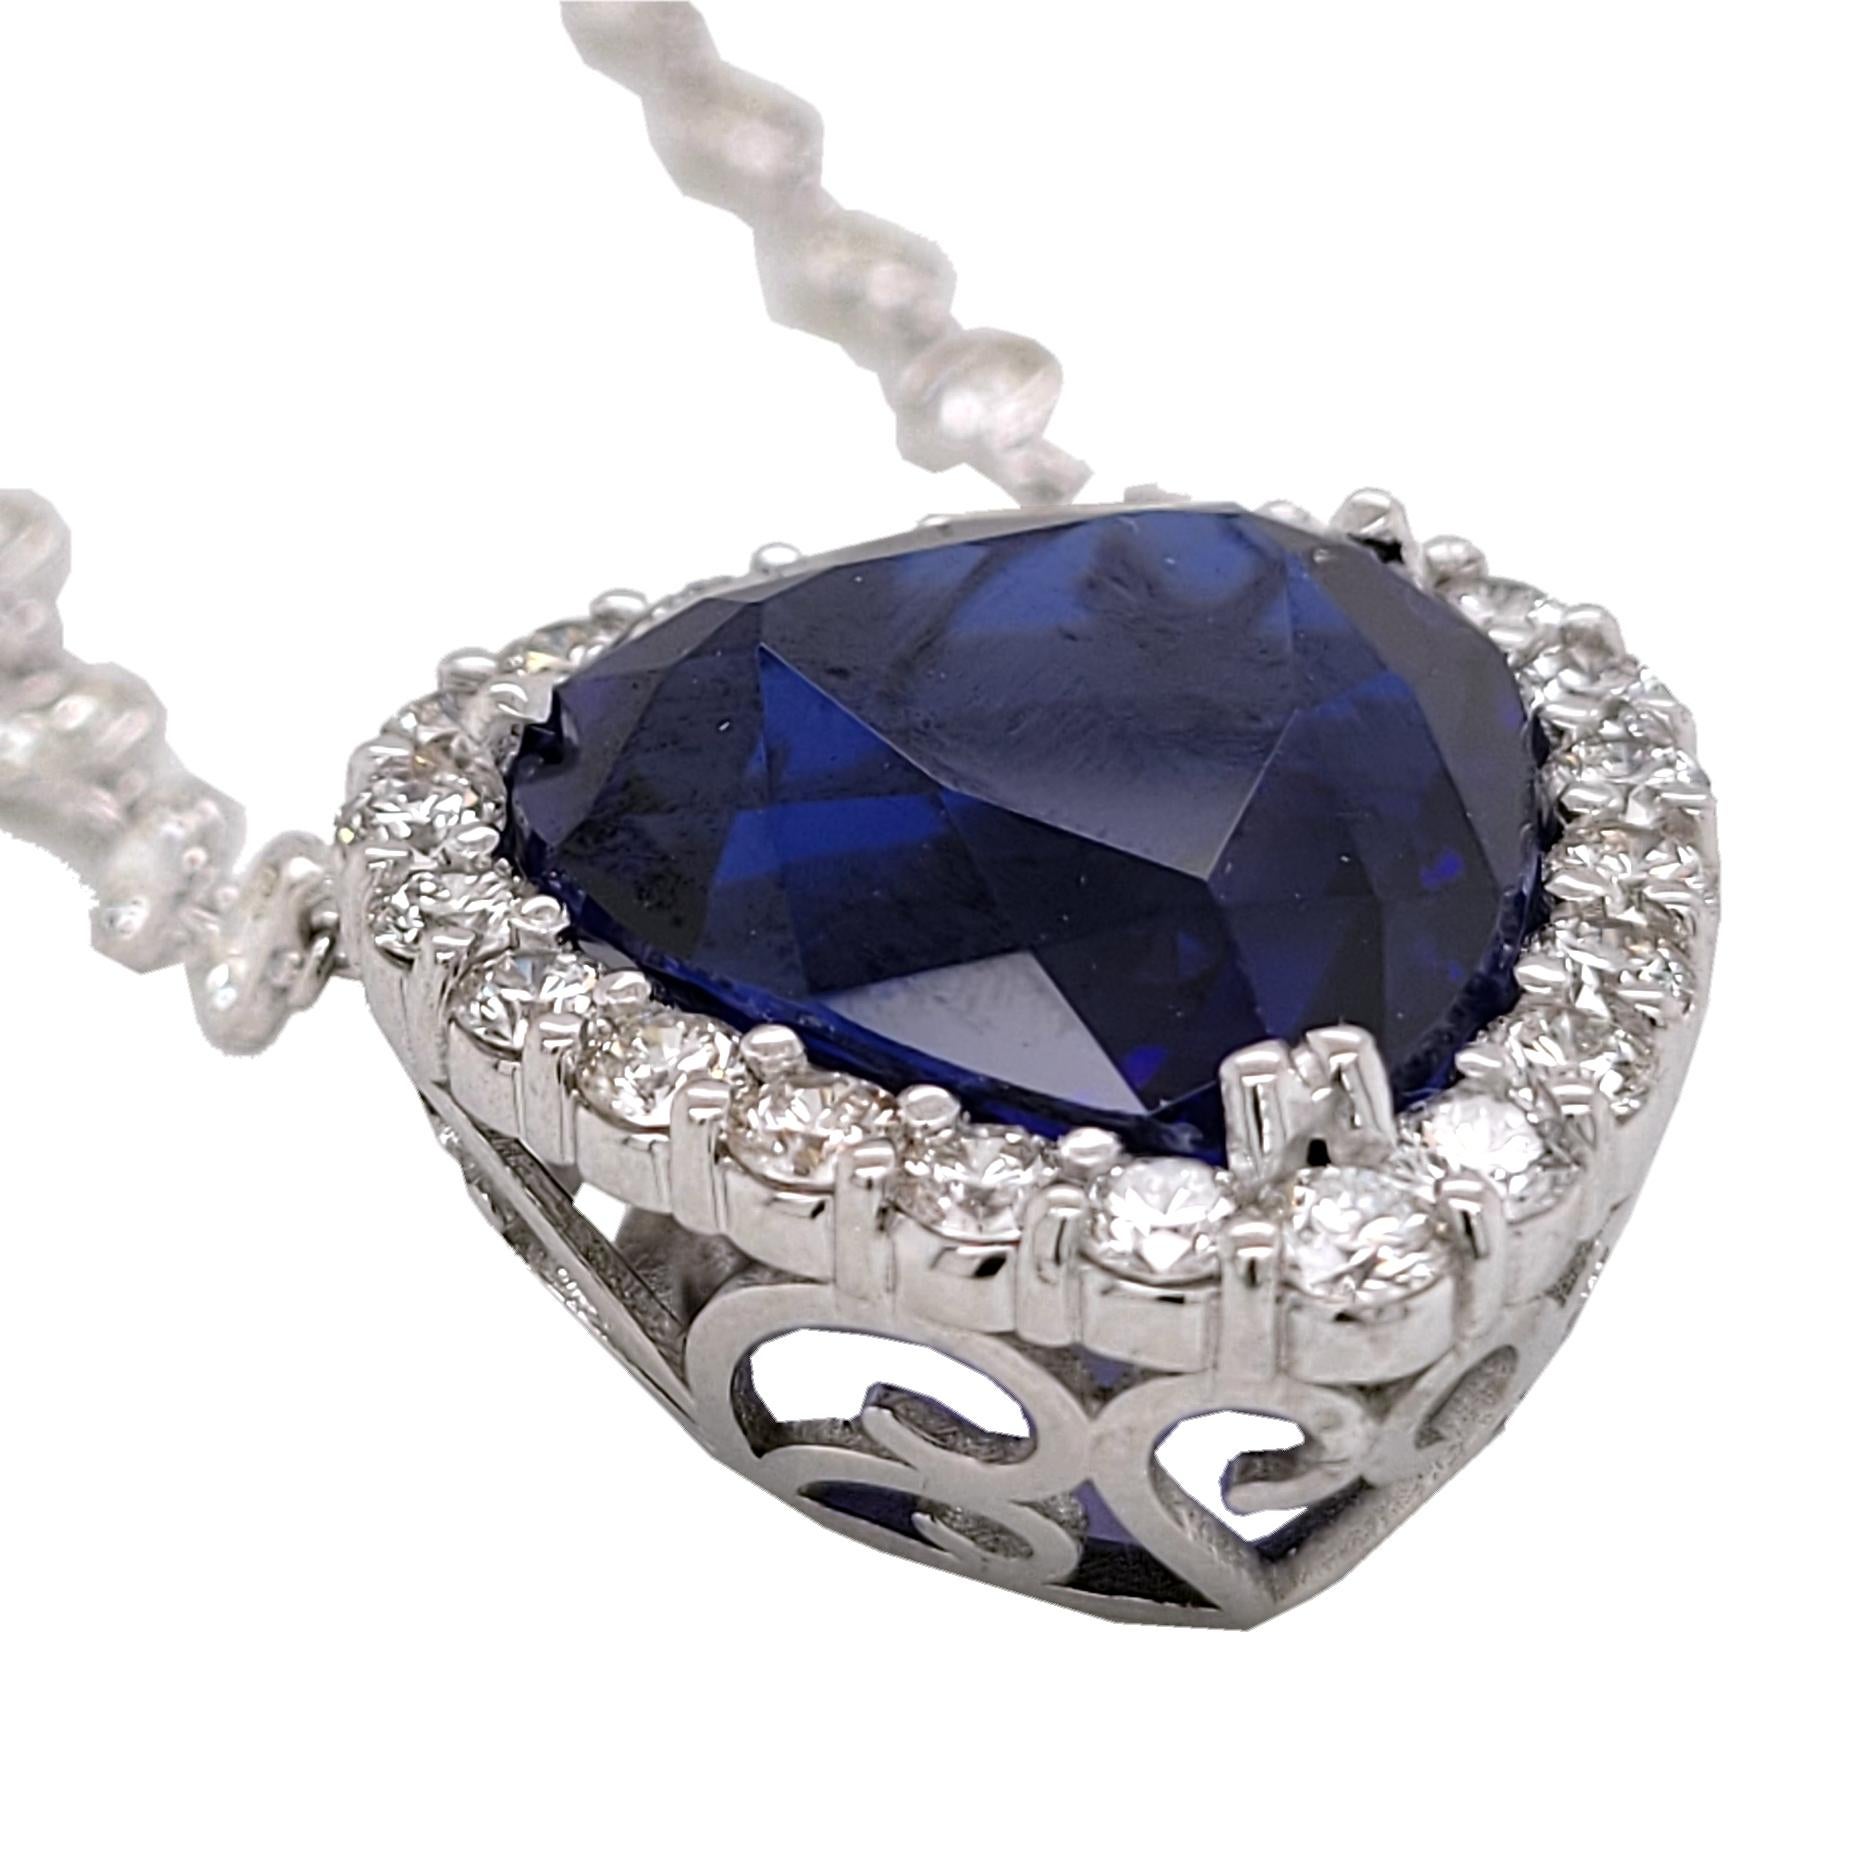 This Beautiful 22.73 Ct Heart Shape Tanzanite is set in a beautiful hand crafted Hear shape Pendant with Halo (with 22 perfectly matched 2.7 mm Round Brilliant diamond) hanging on a 16 inch diamond by the Yard Necklace with 53 Perfectly matched 2.8